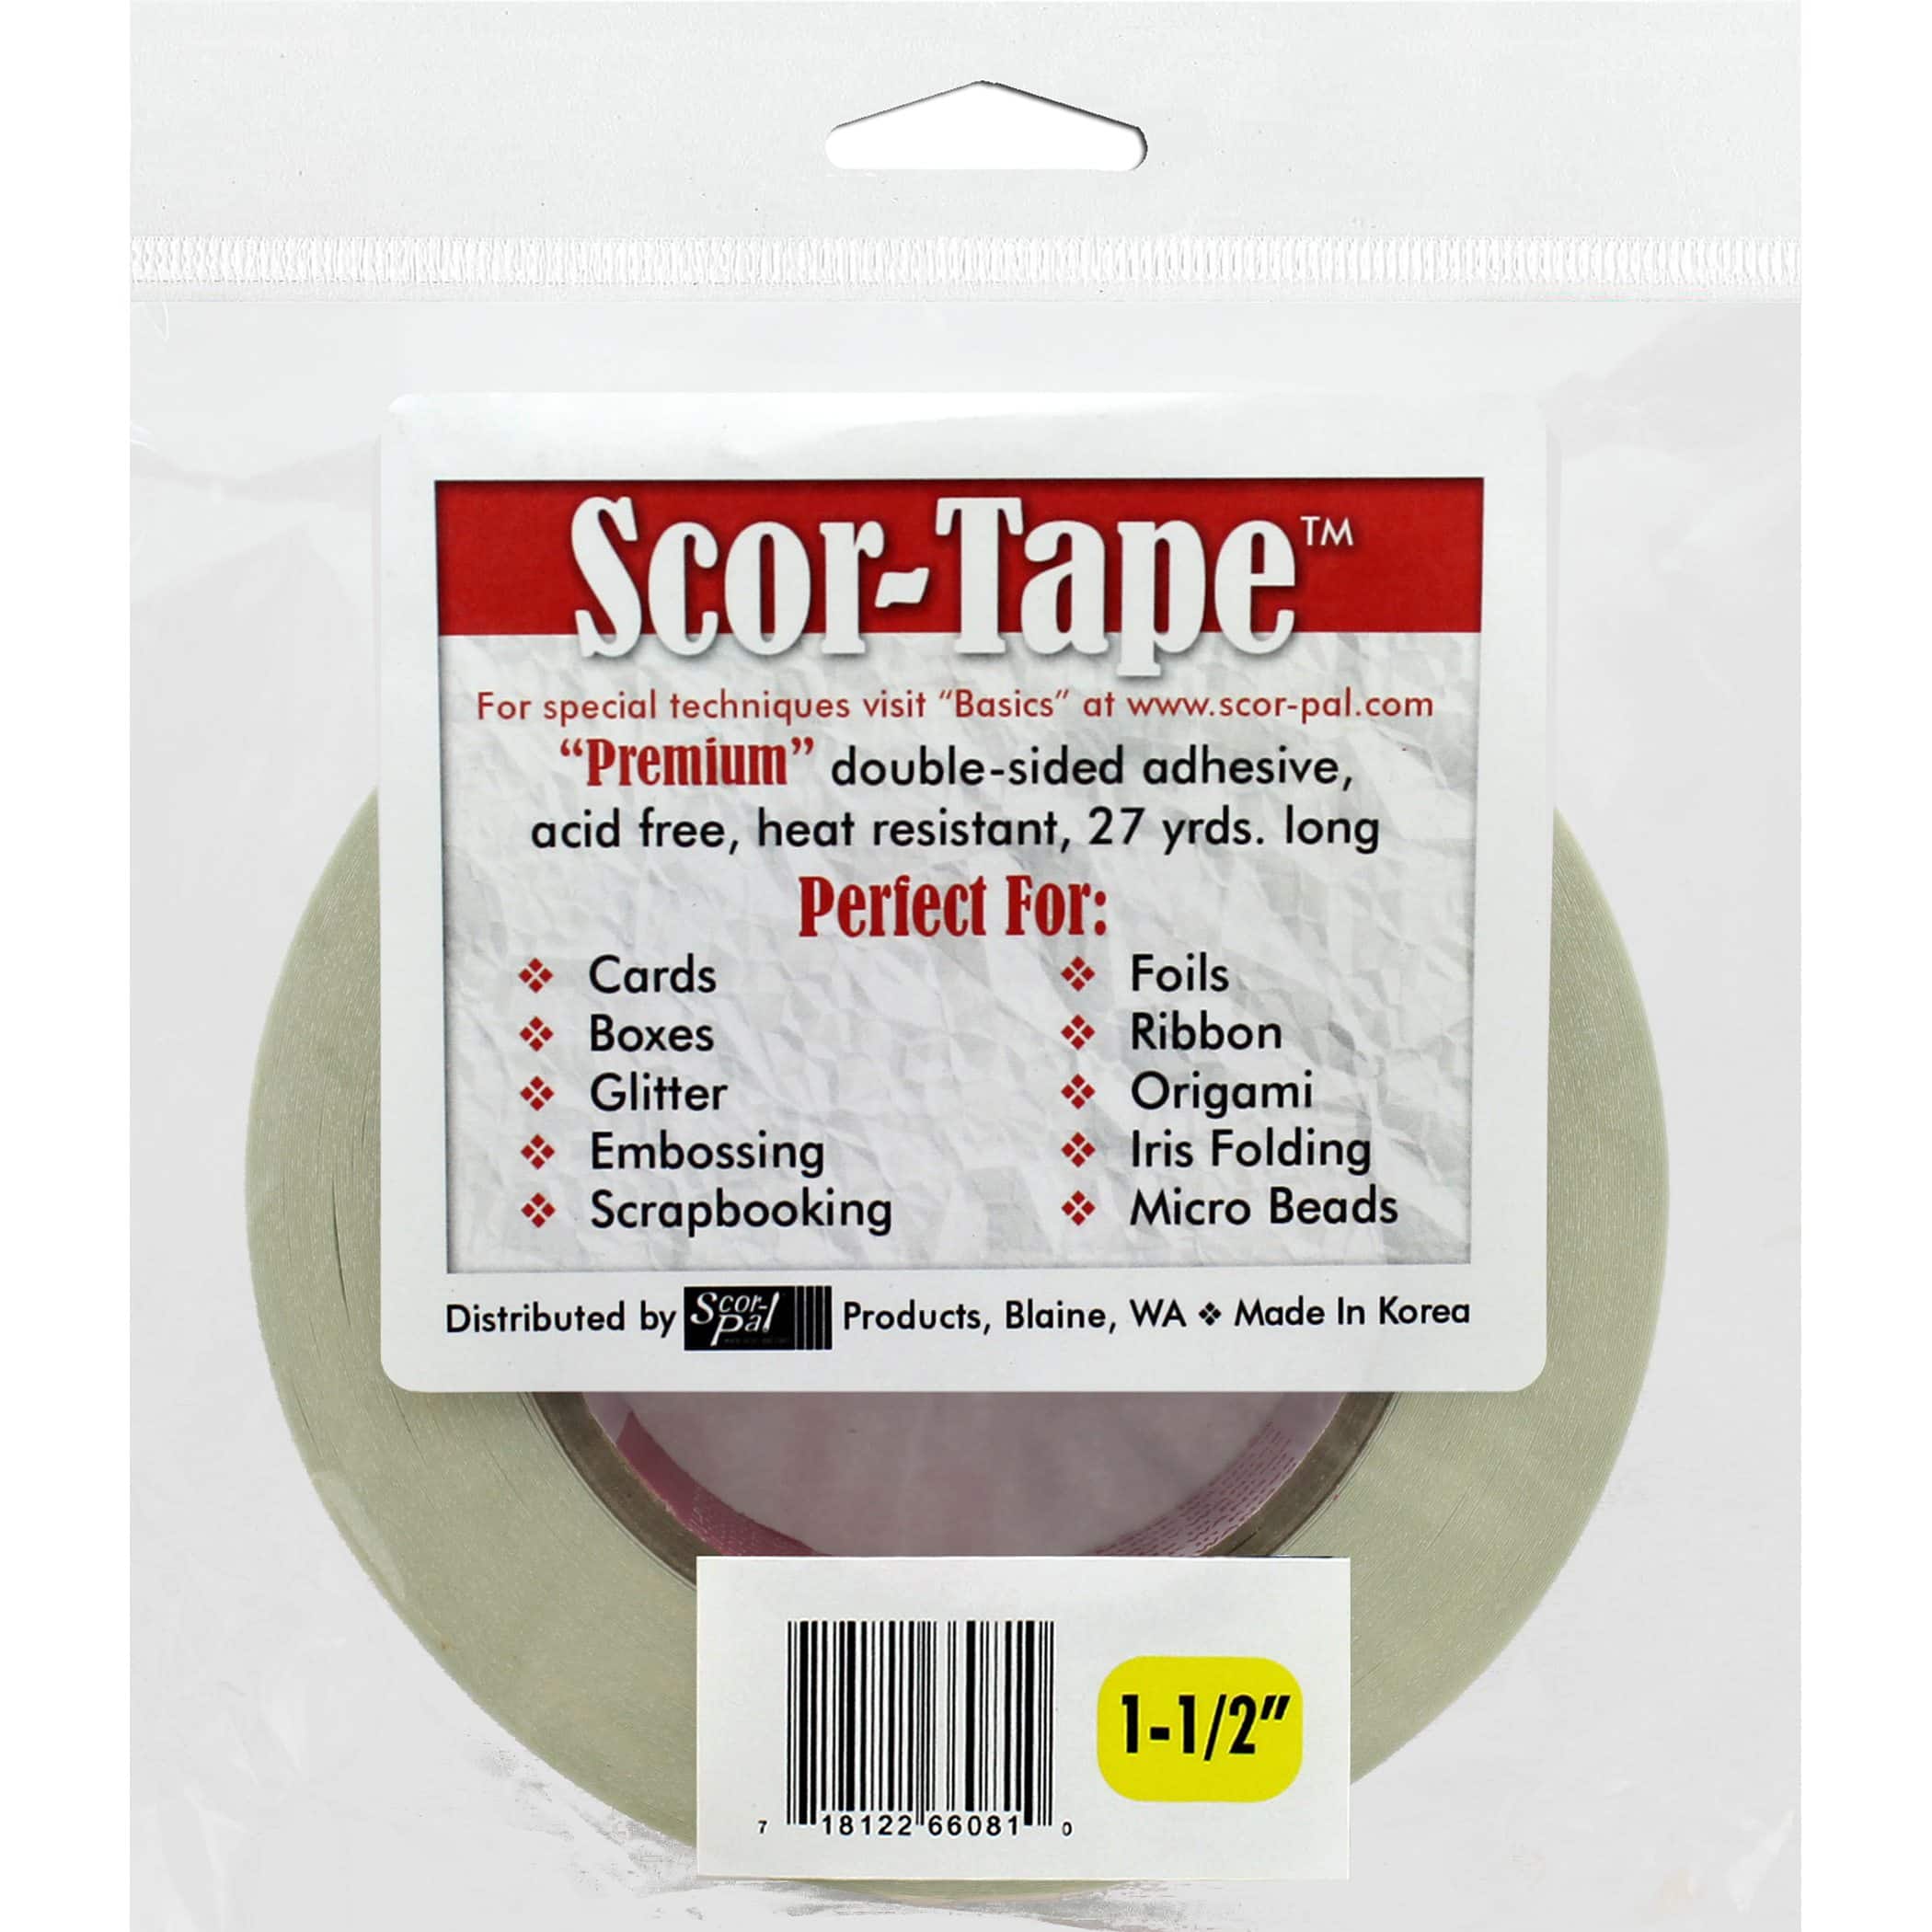 Scor-Tape Double-Sided Adhesive Premium & Acid-Free 1/4 wide, 27 yds -  Sunny Studio Stamps